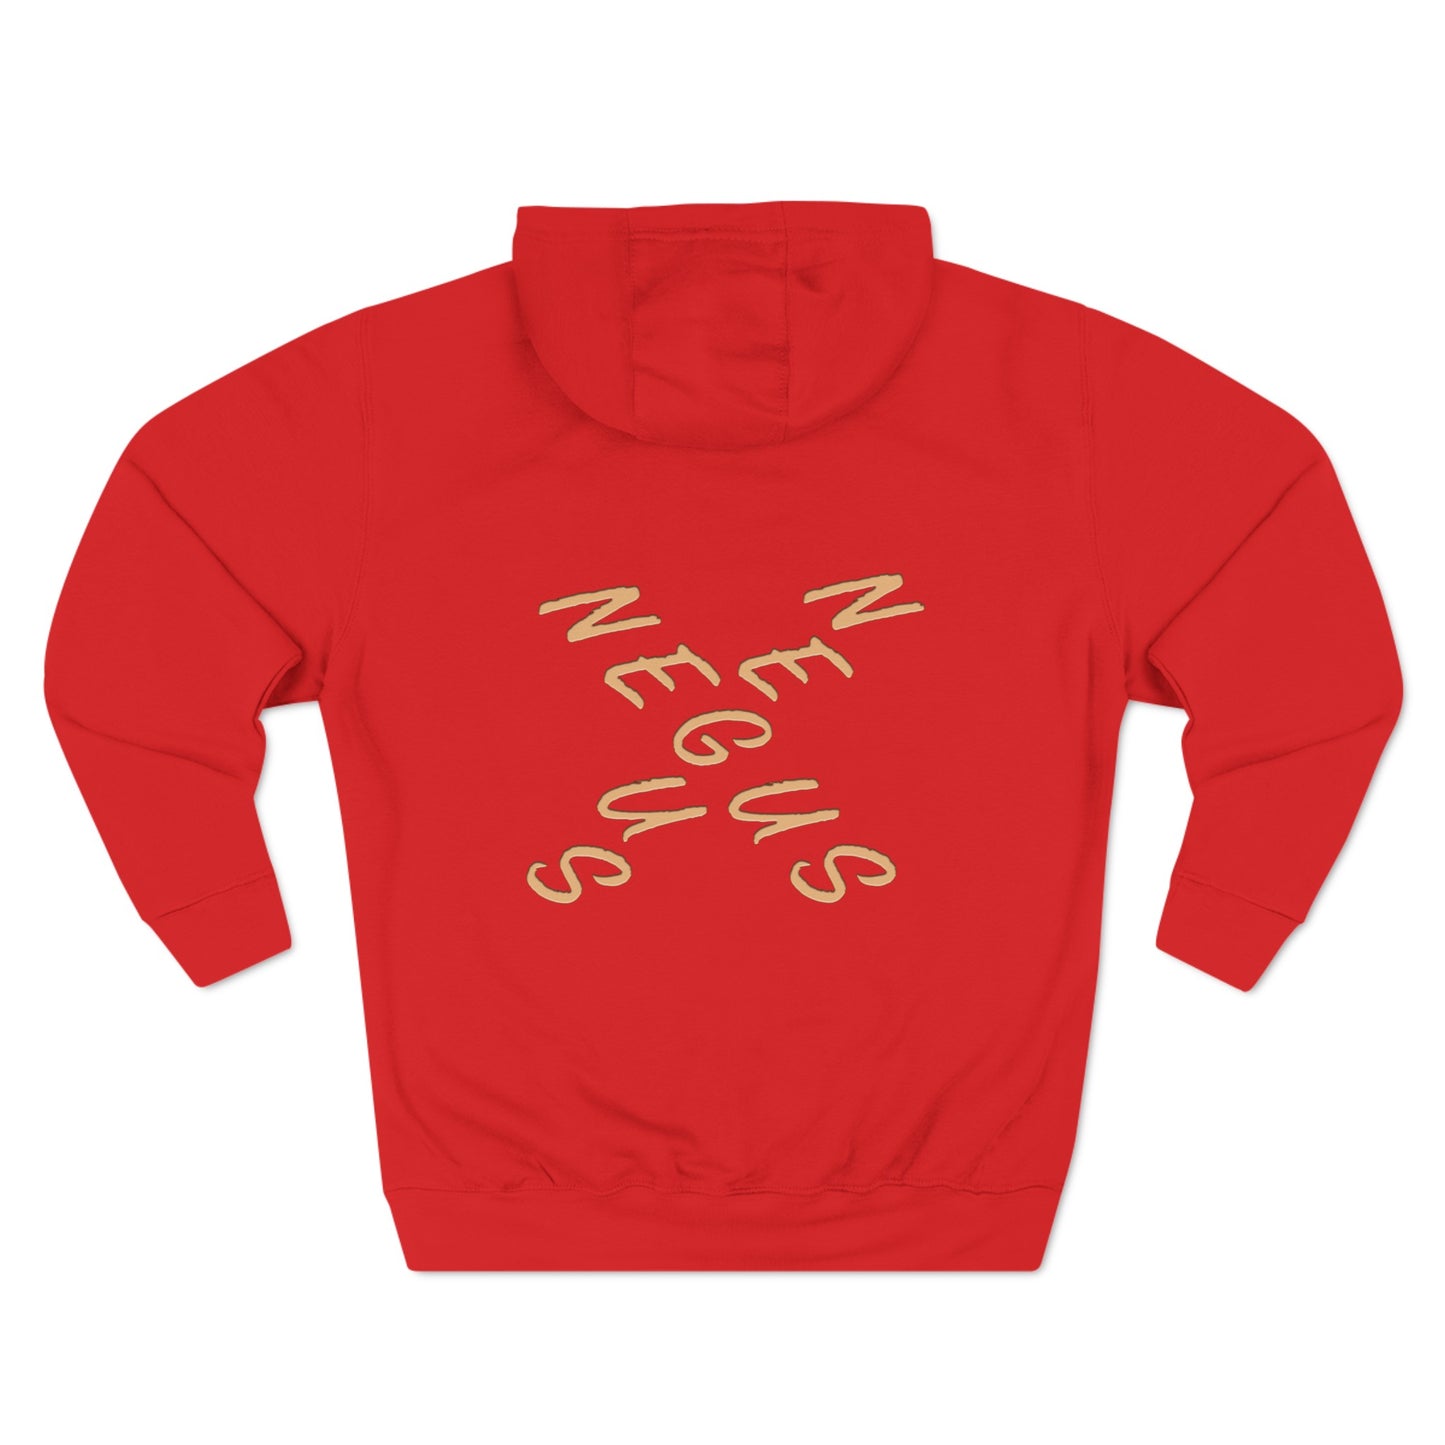 FGN TrapHouse Pullover Hoodie (F&B)